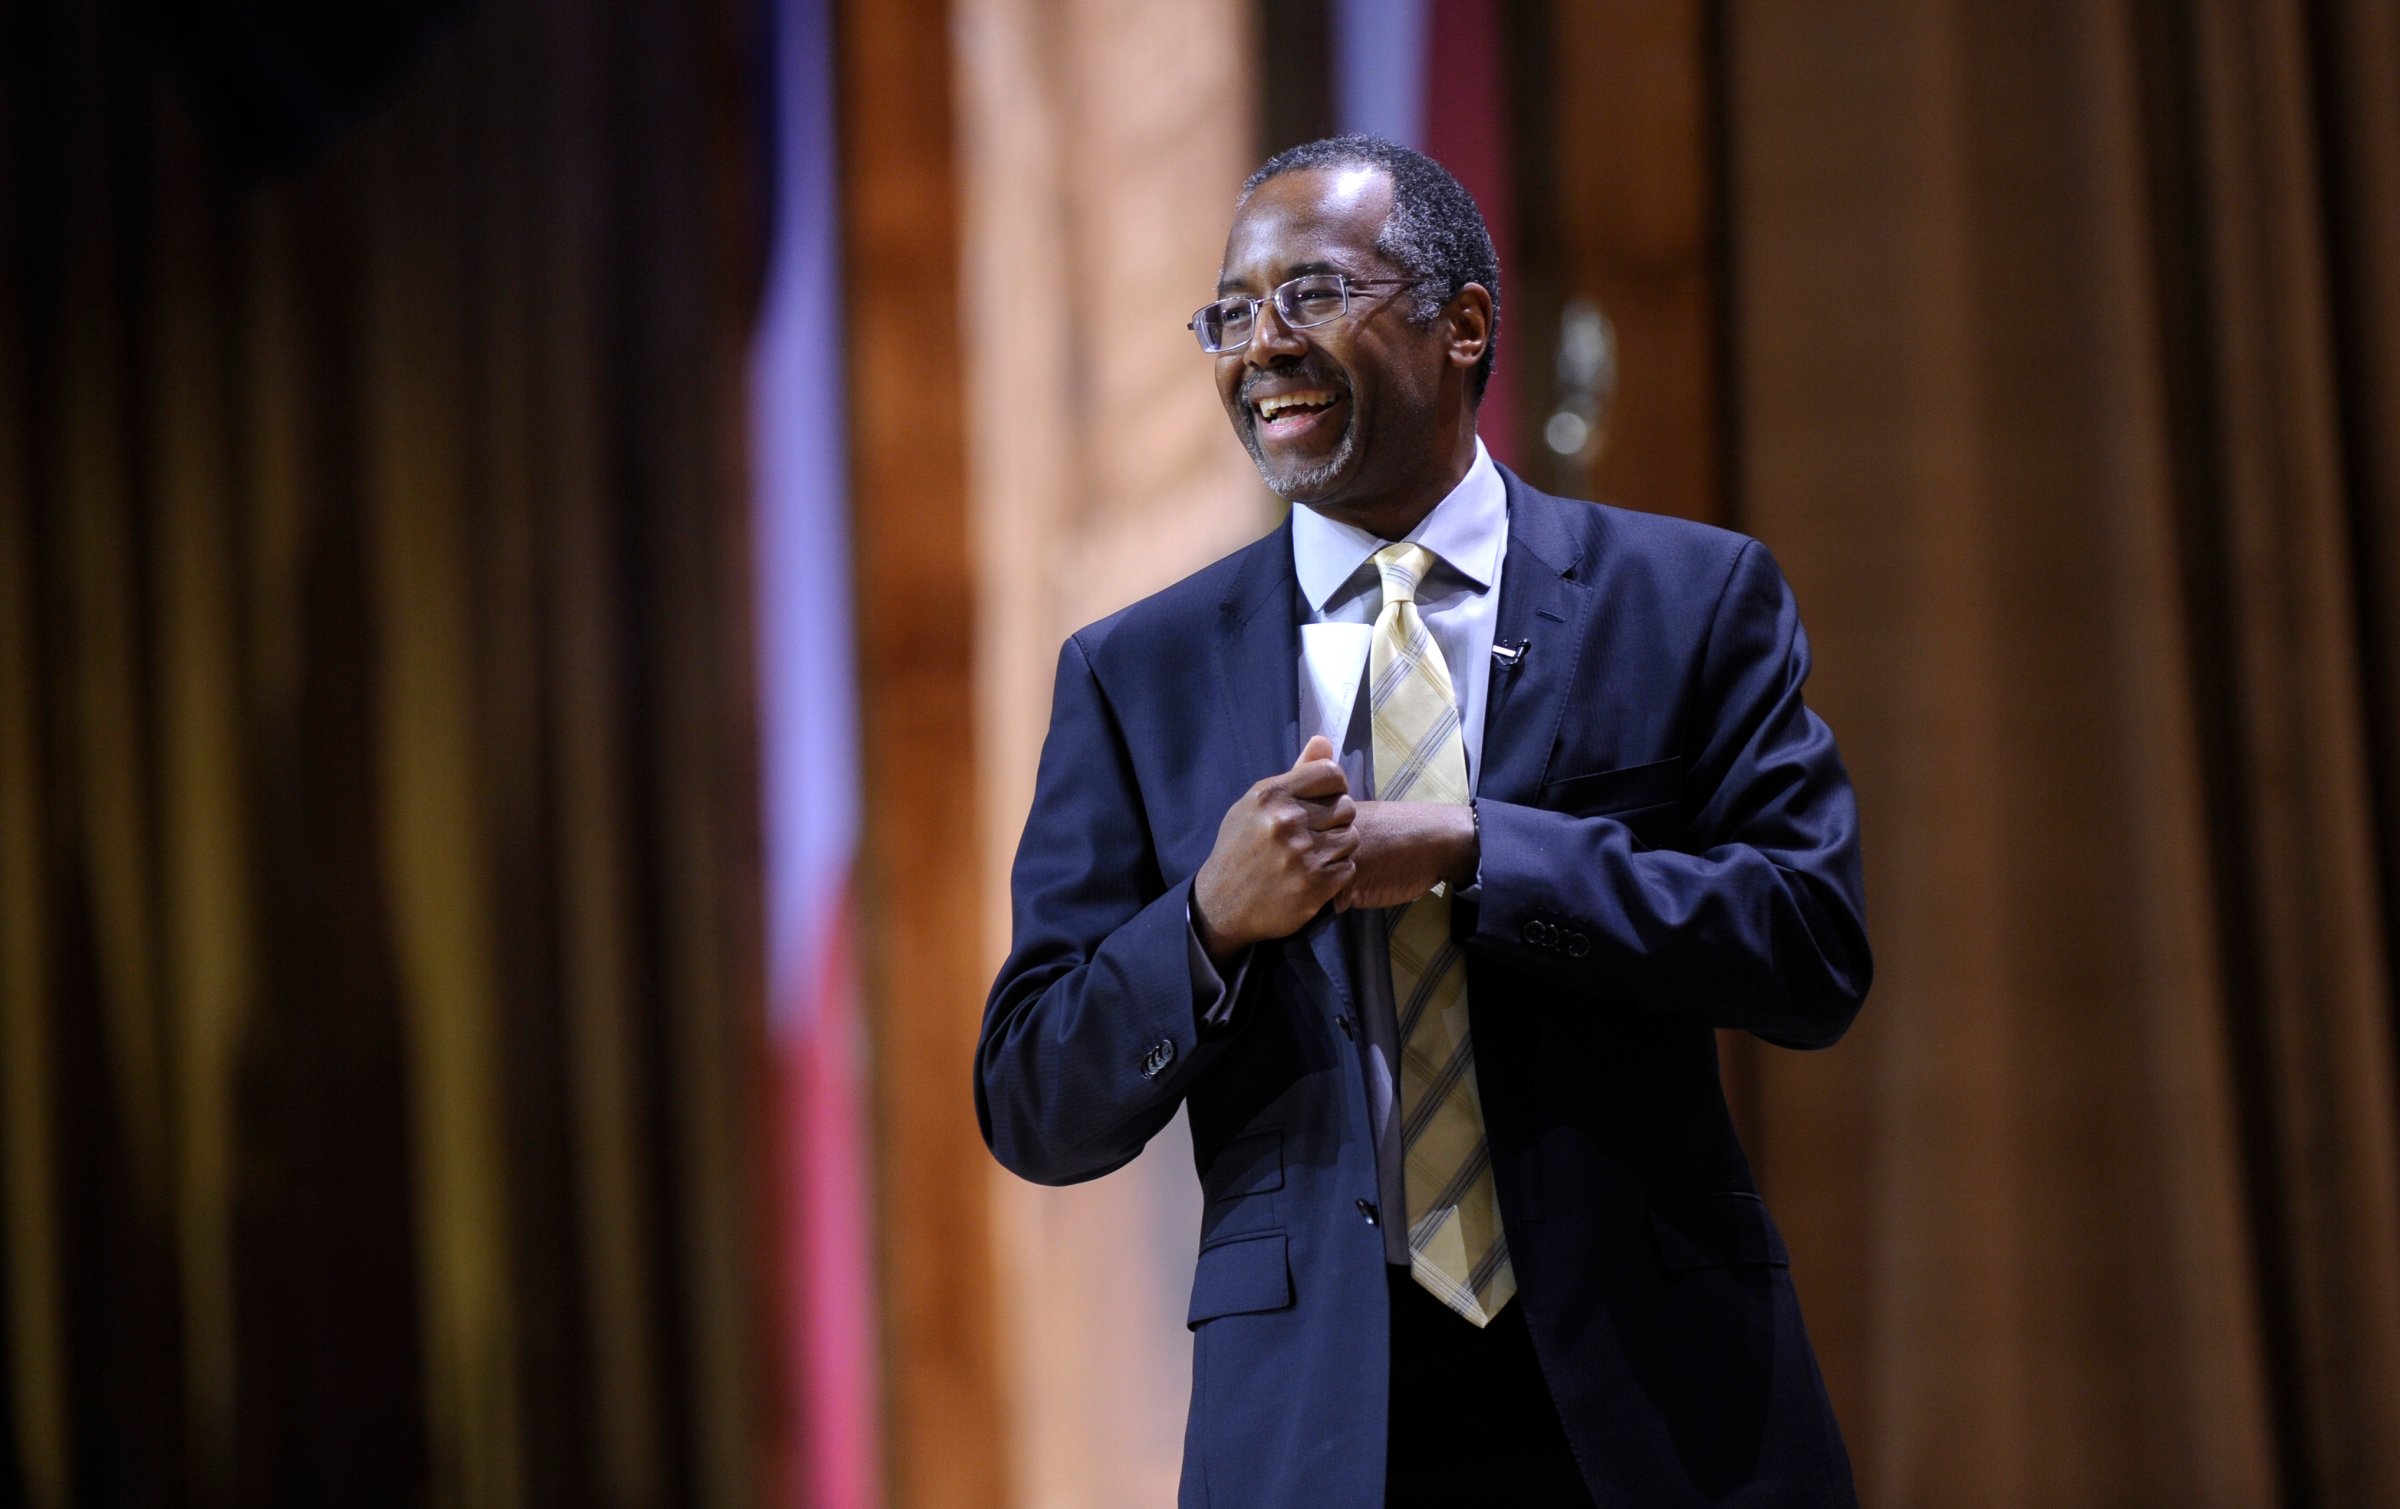 Dr. Ben Carson, professor emeritus at Johns Hopkins School of Medicine, speaks at the Conservative Political Action Conference annual meeting in National Harbor, Md., on March 8, 2014.